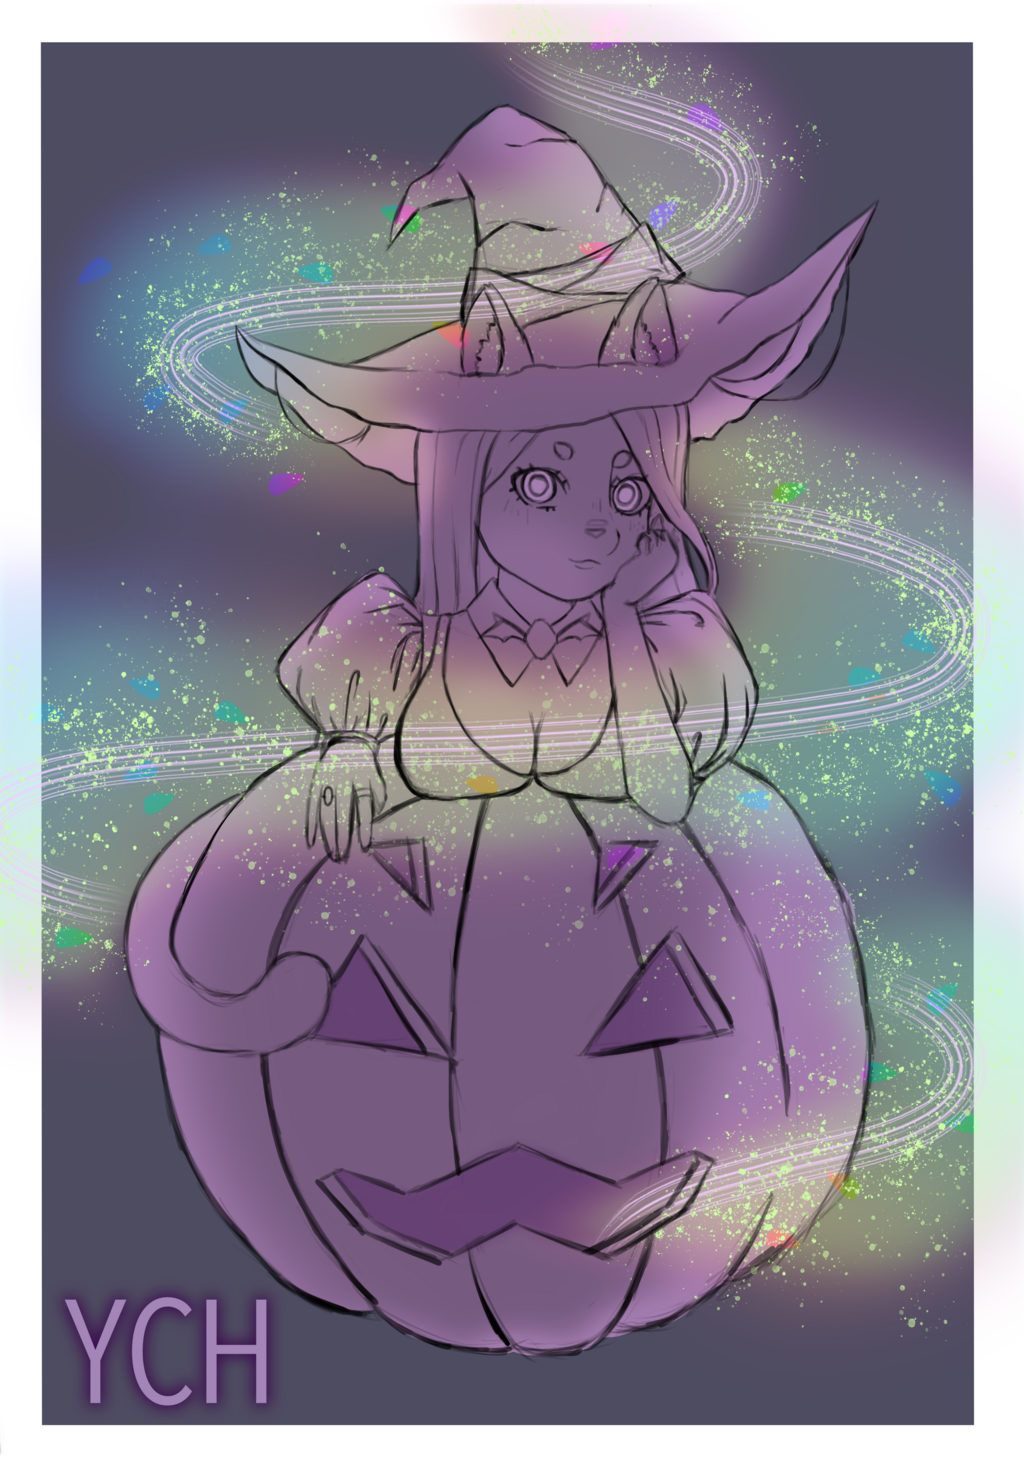 Most recent image: HALLOWEEN YCH